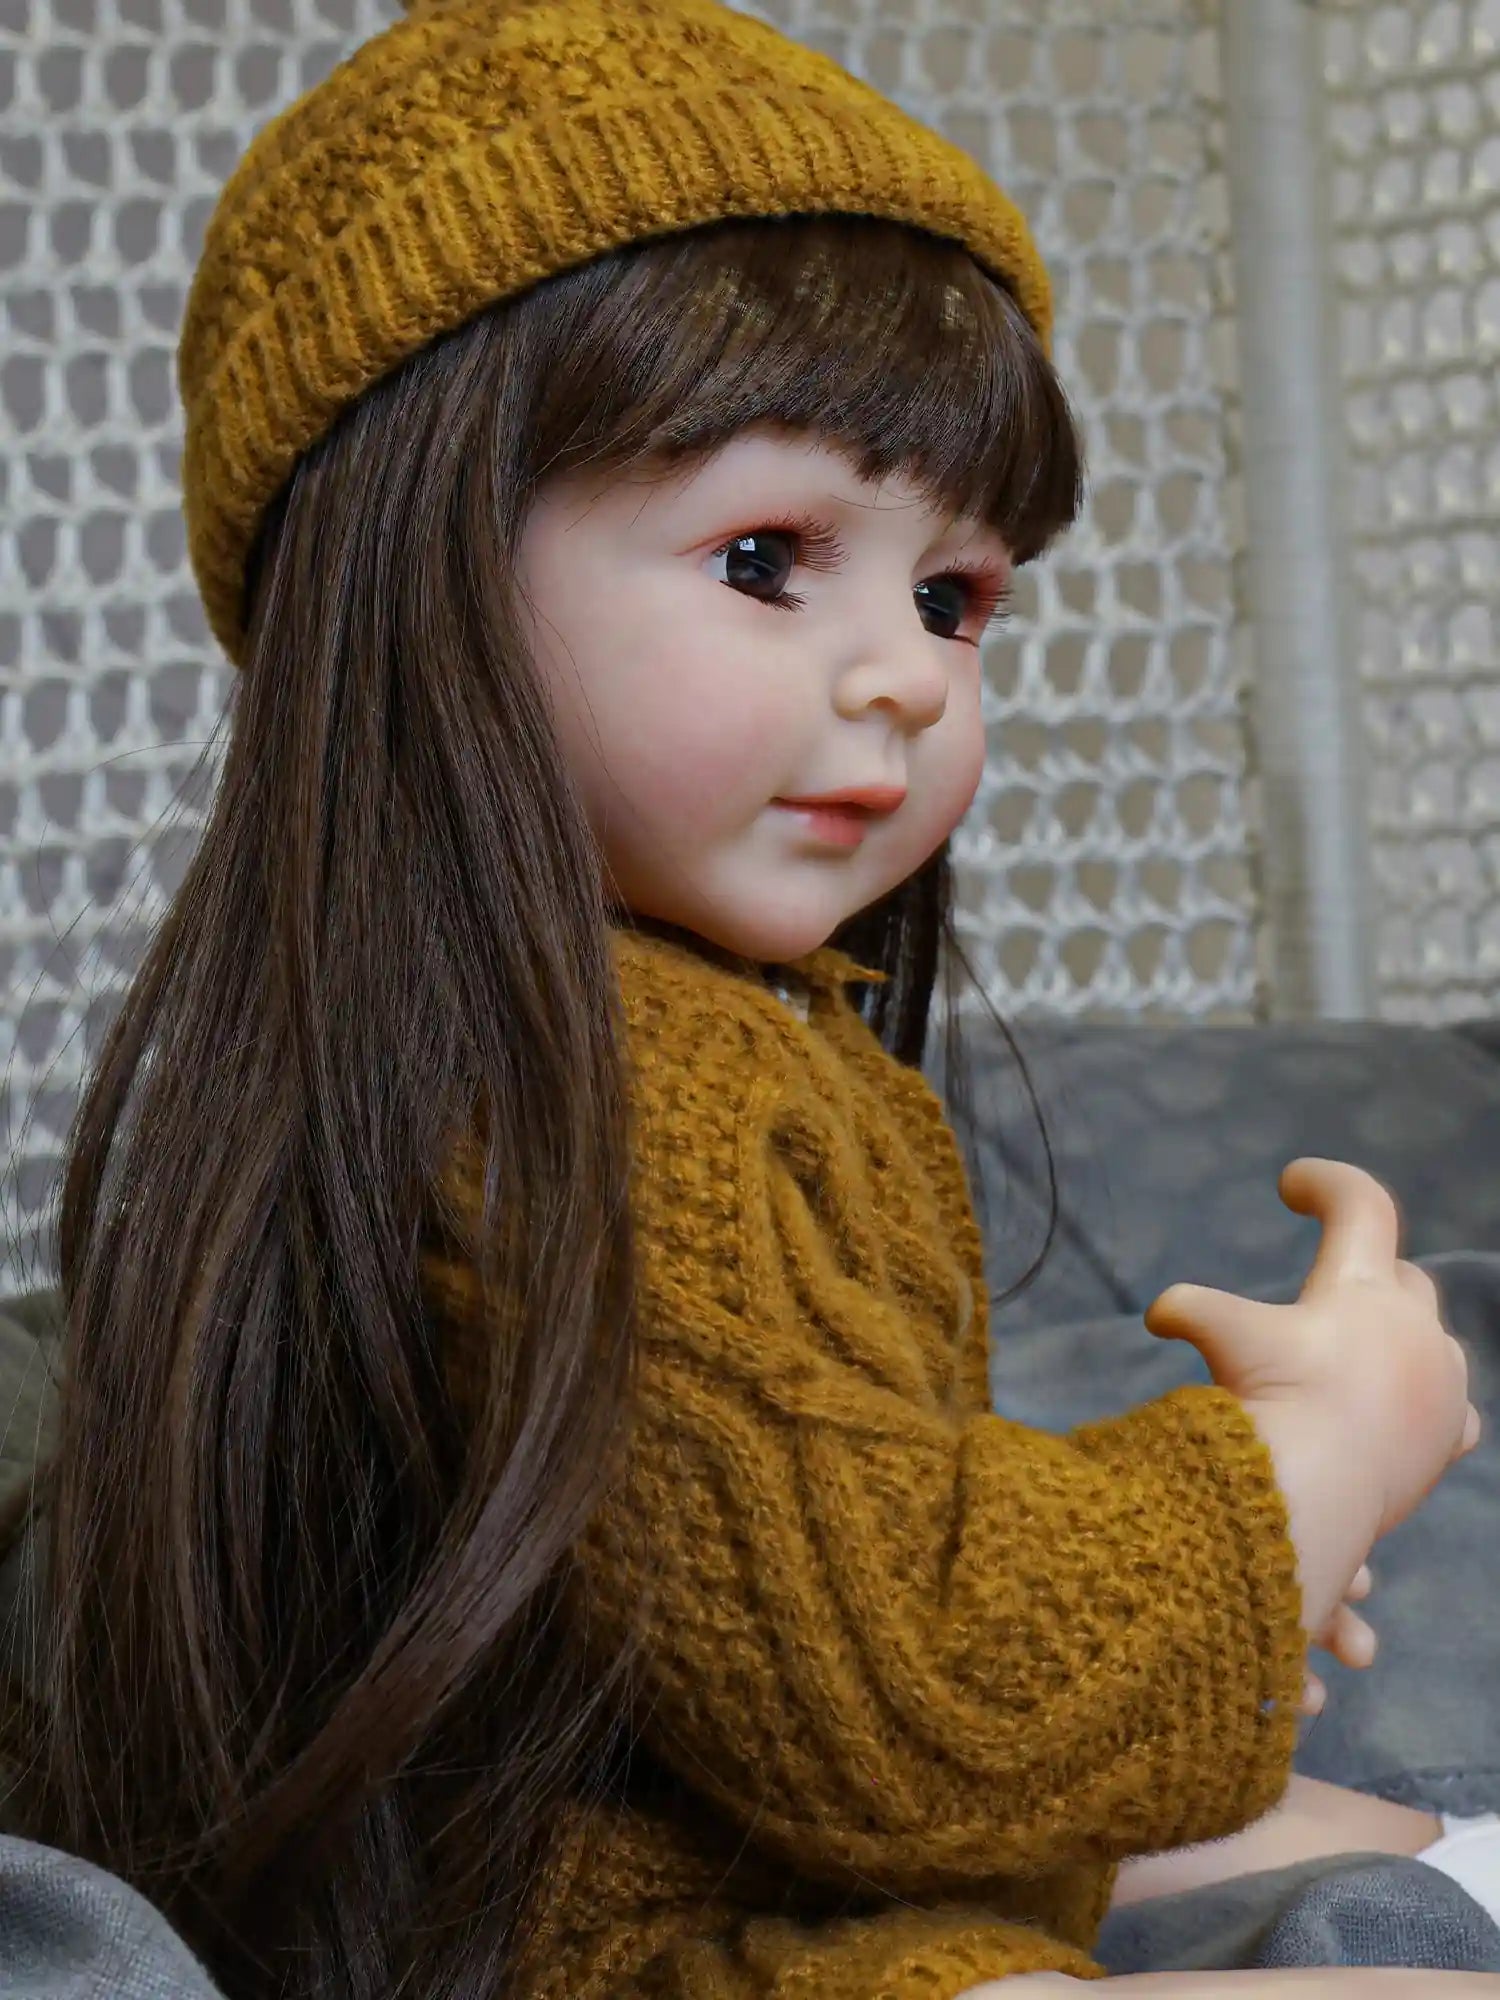 A reborn doll portraying a young girl, with deep brown eyes and a soft expression, wearing a knitted yellow hat and cardigan, set against a textured gray fabric.